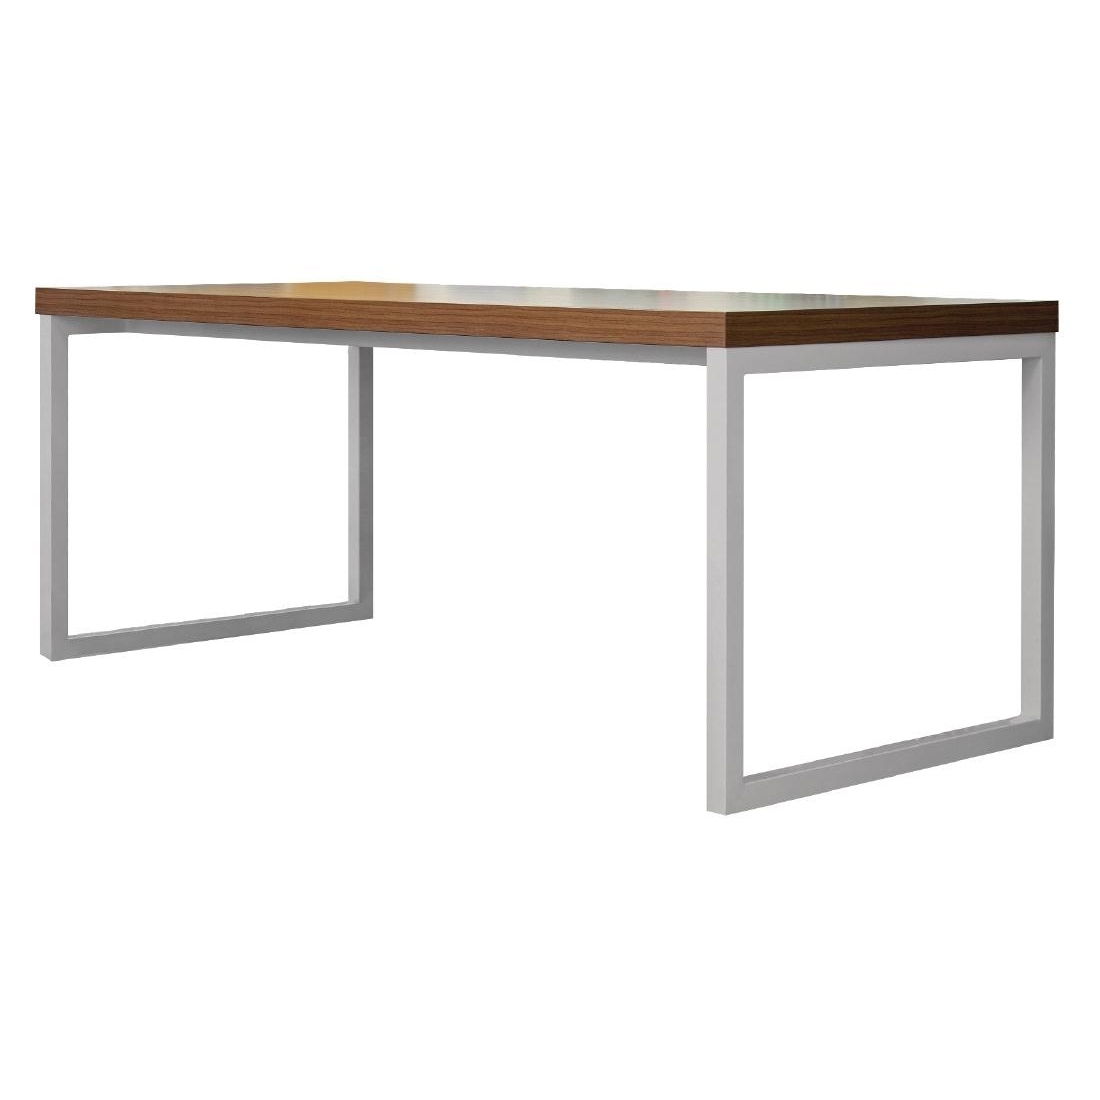 Bolero Dining Table Walnut Effect with Silver Frame 7ft